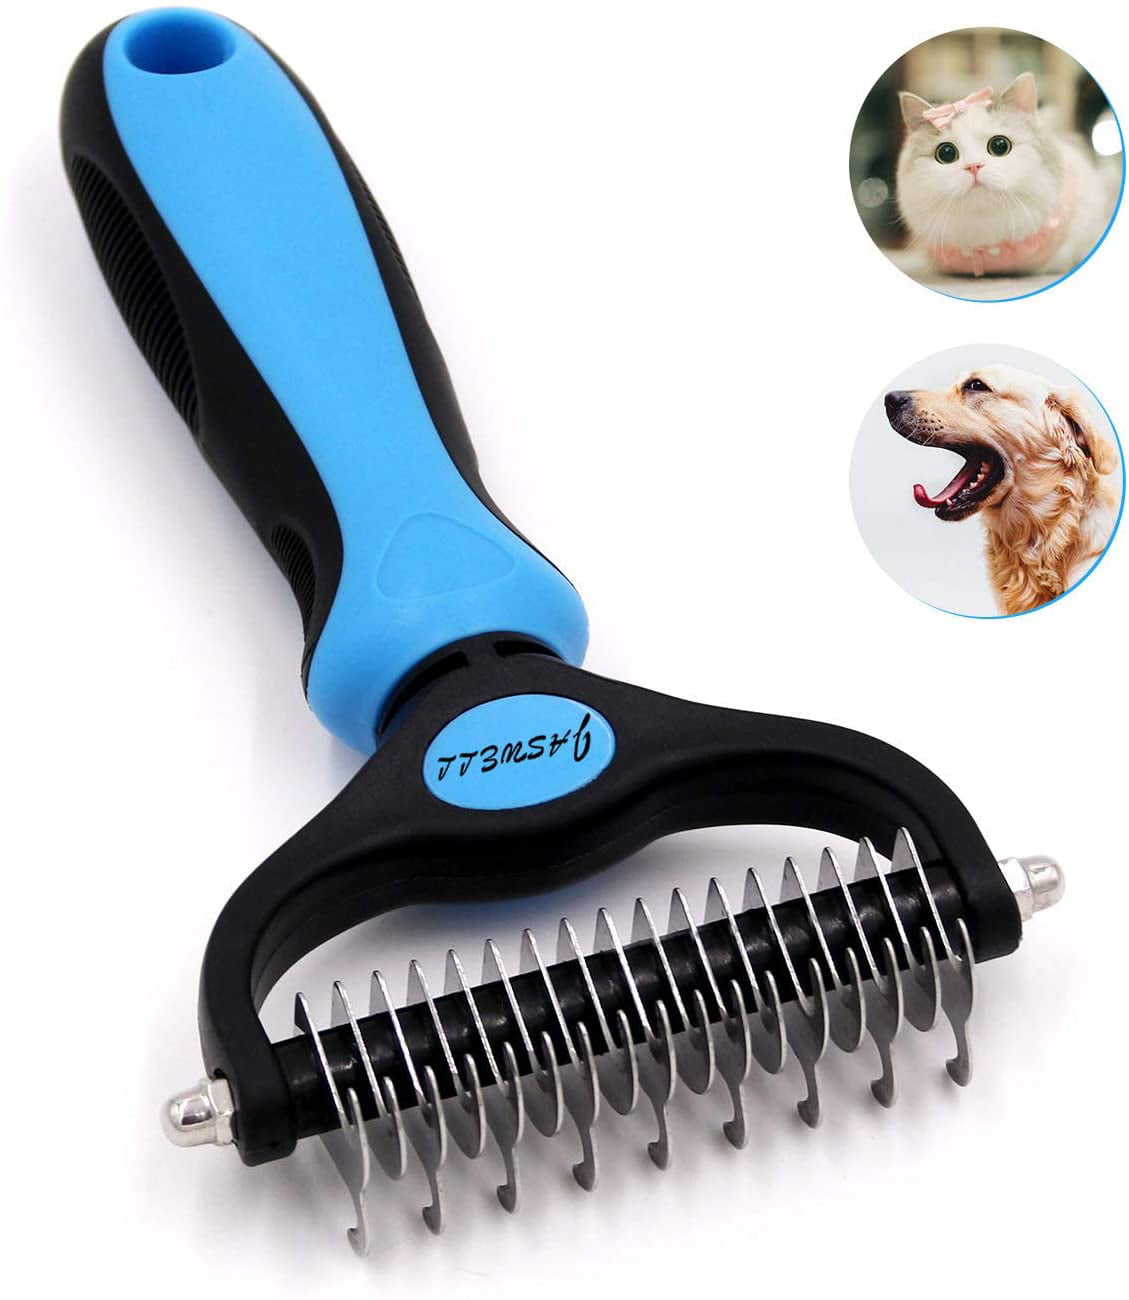 Grooming Tool for Medium and Large Pets with Long Hair Dog Grooming Comb Cat Double-Sided Metal Shedding Brush